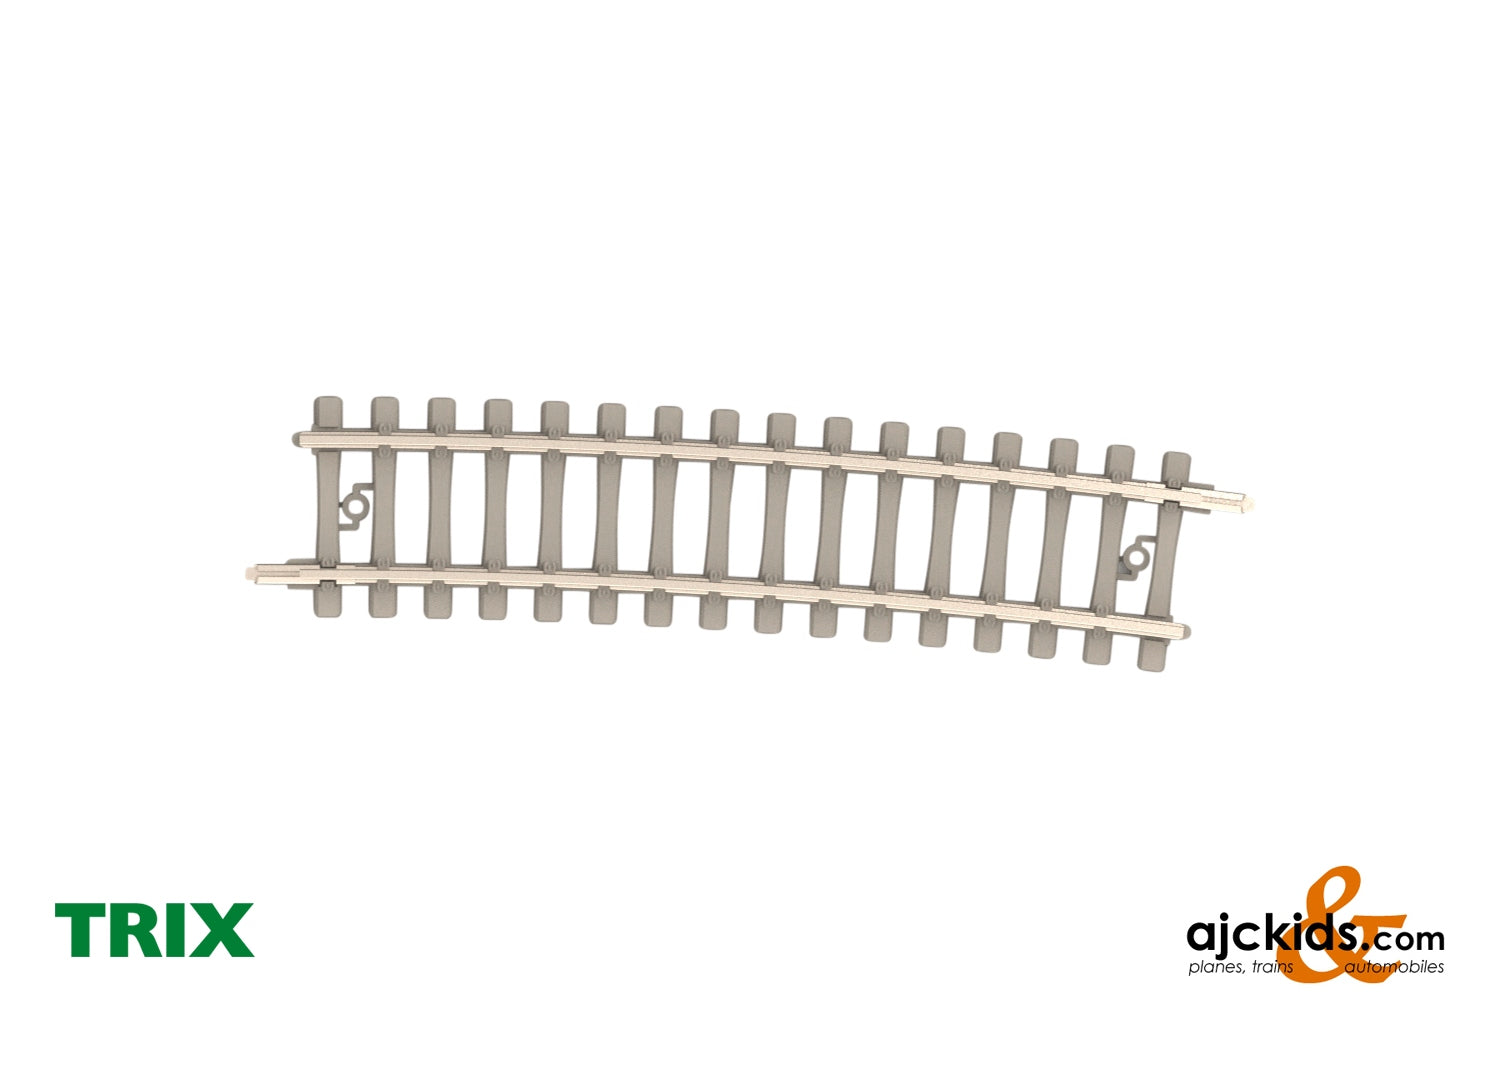 Trix 14515 - Curved Track with Concrete Ties